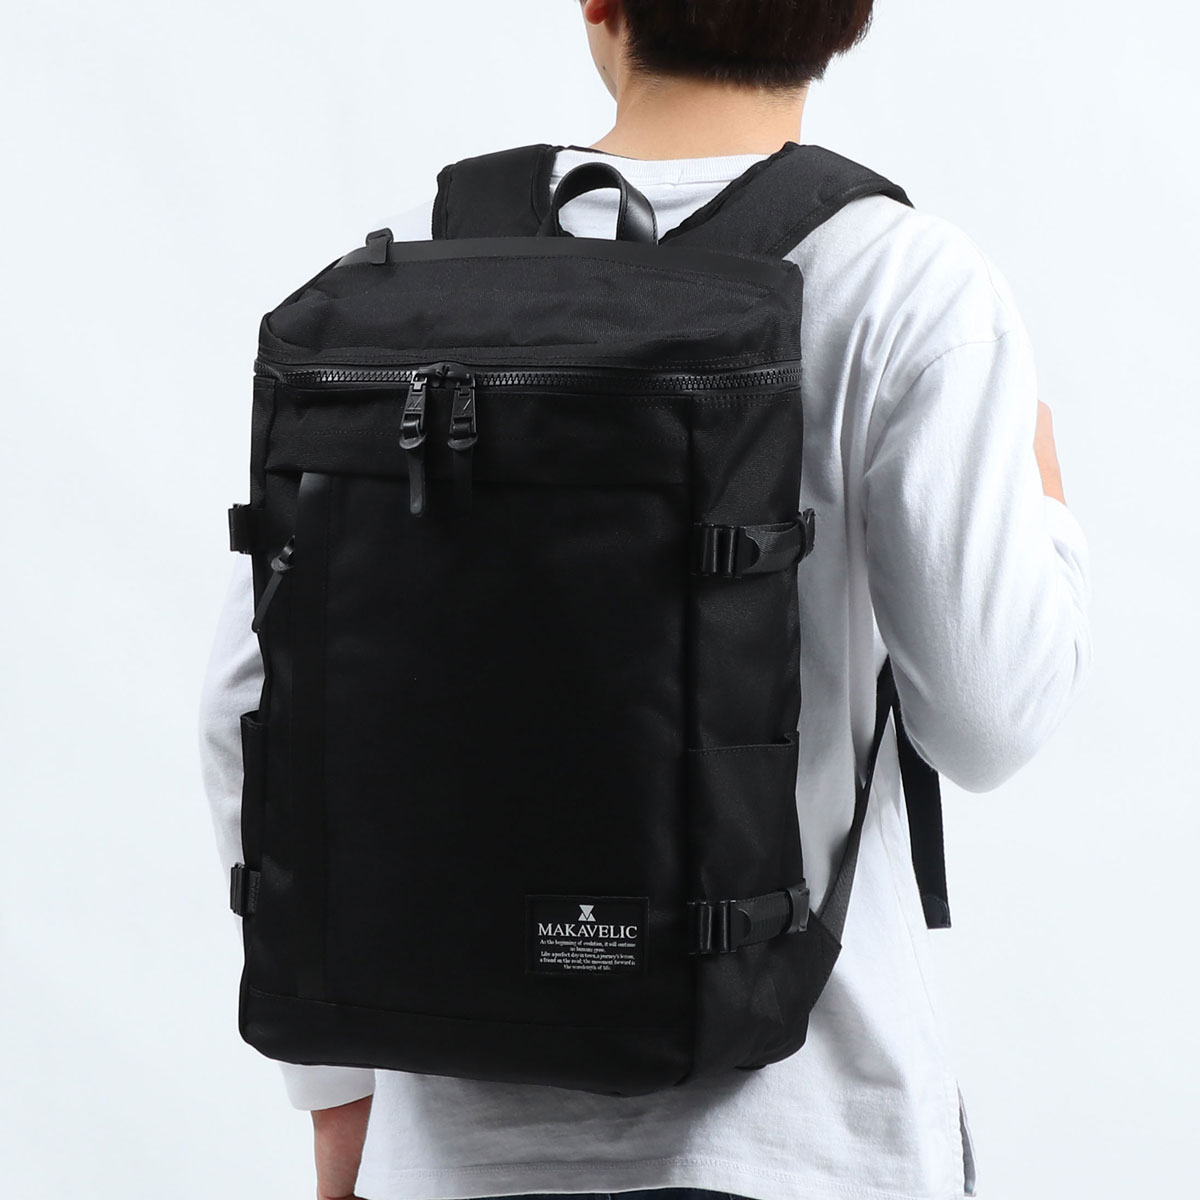 MAKAVELIC マキャベリック CHASE RECTANGLE DAYPACK 25L 3106-10121 ...